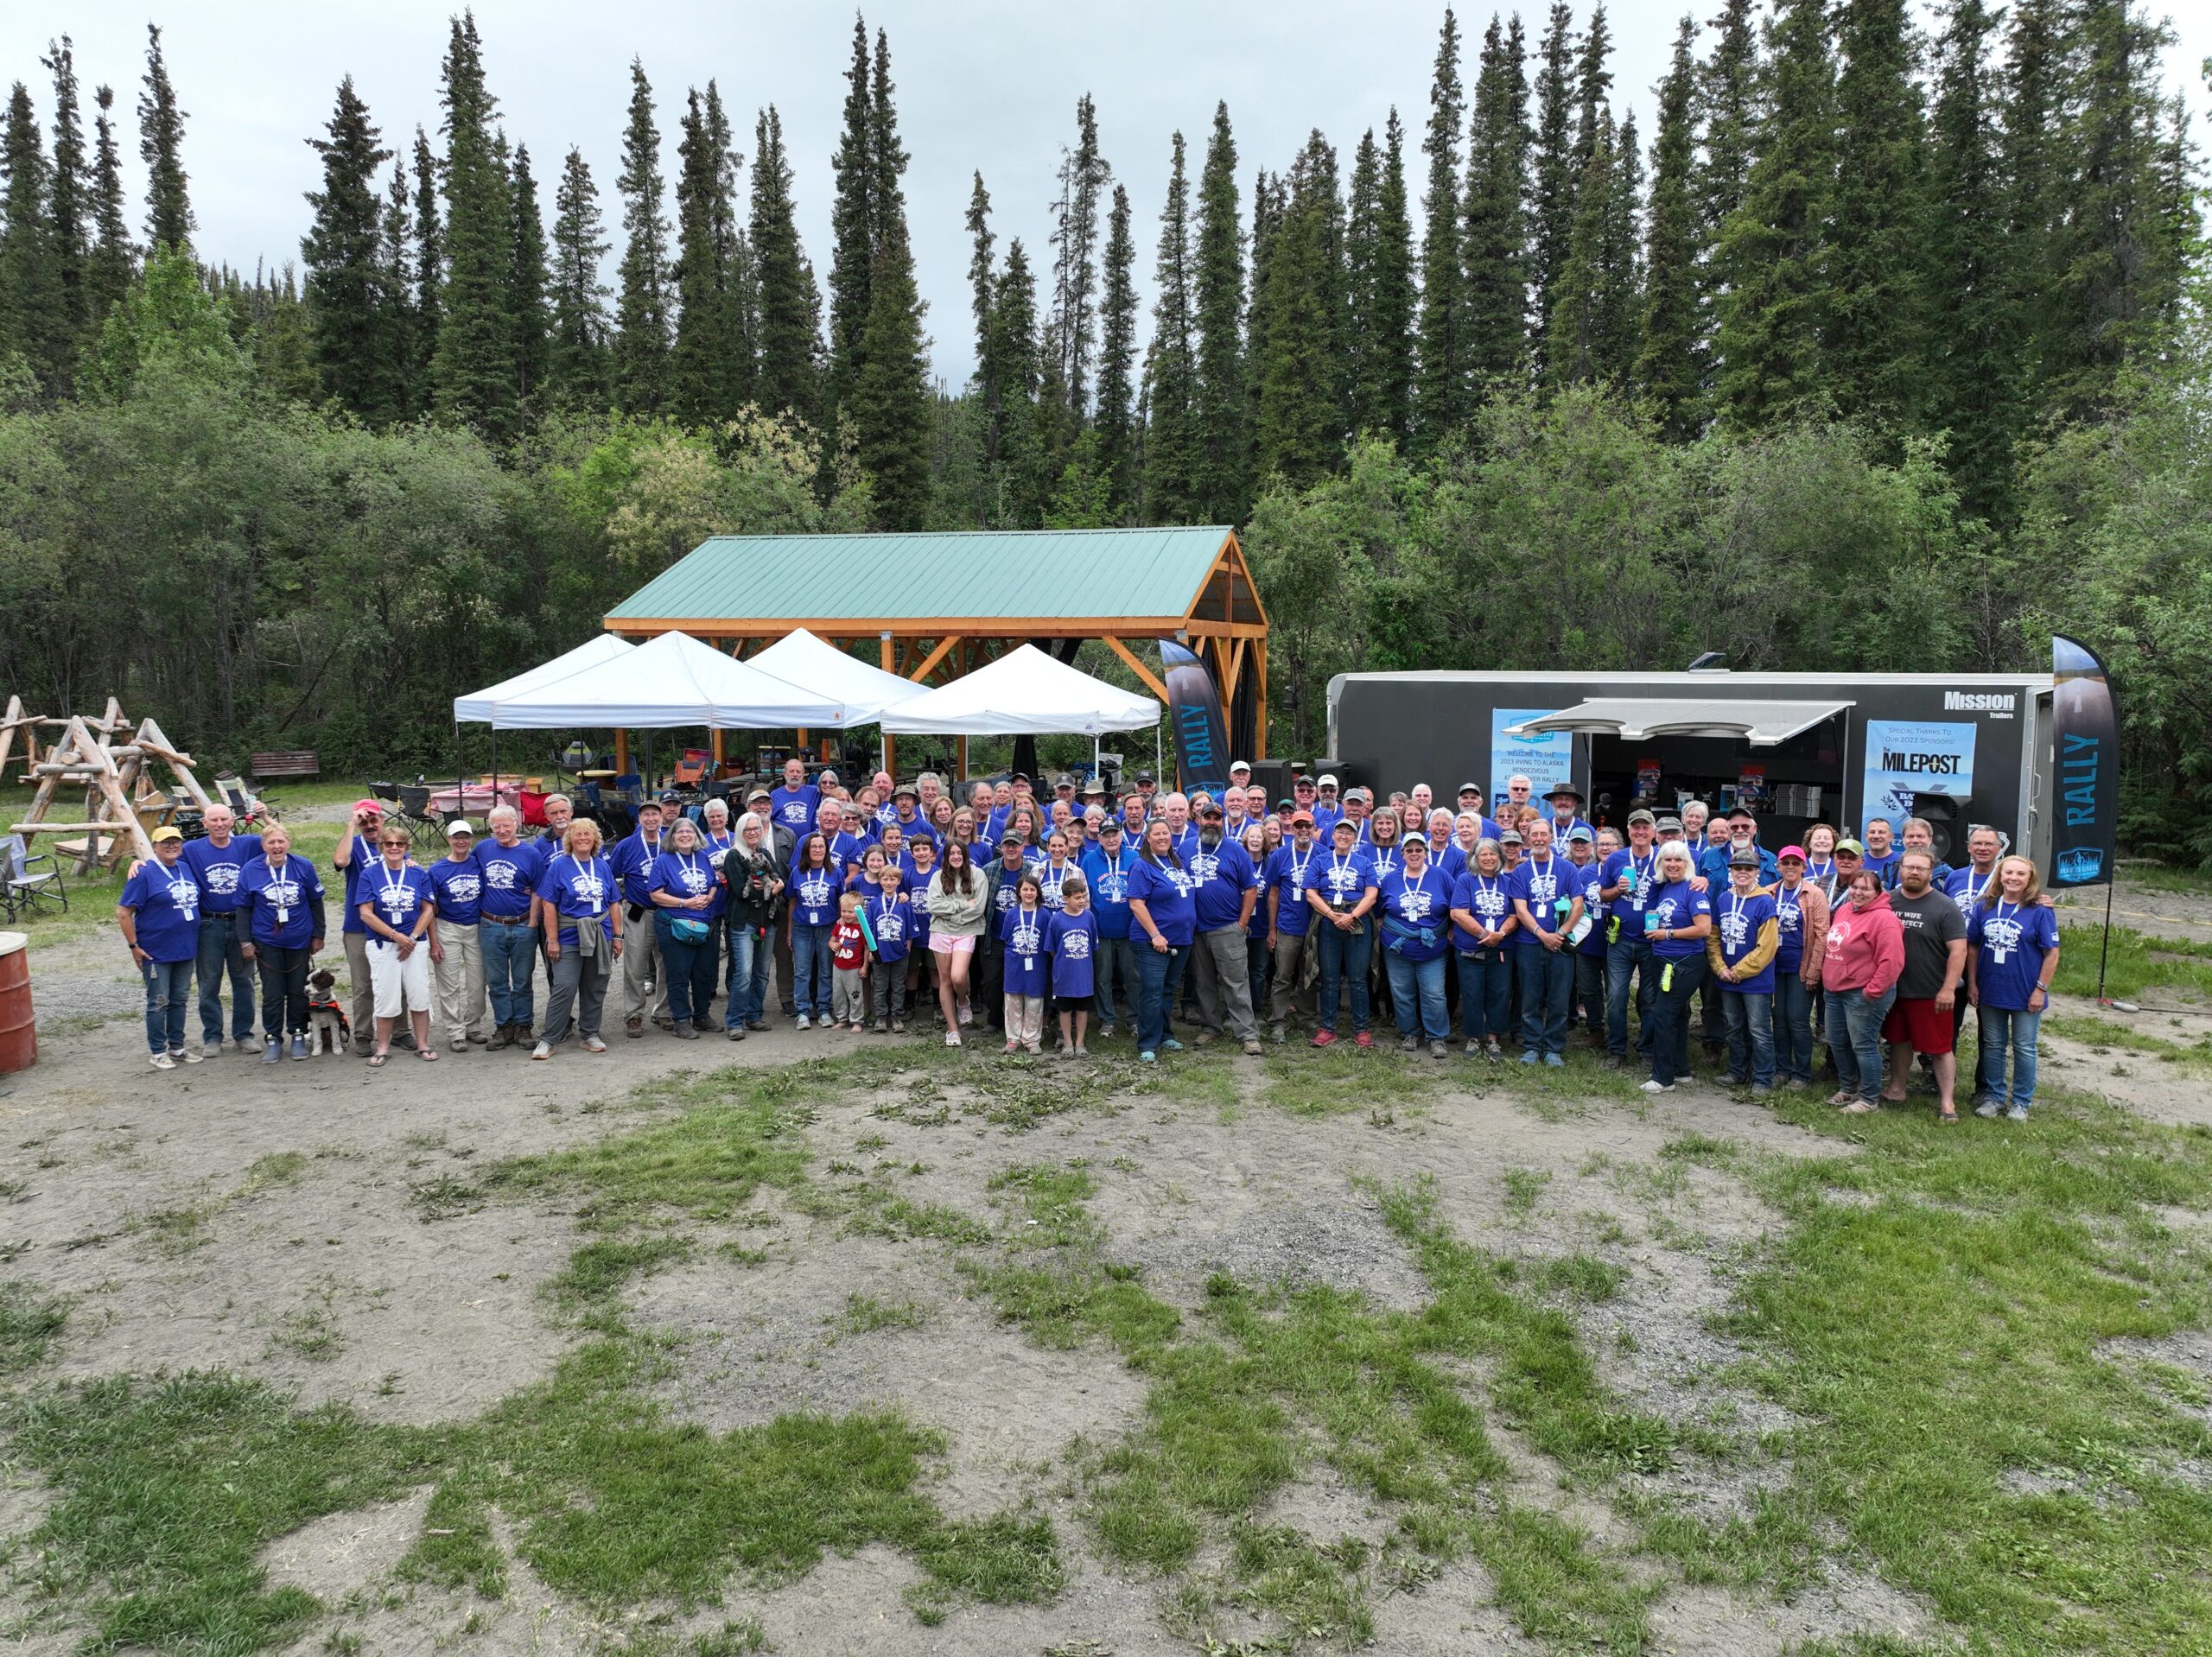 Another year and another great RVing to Alaska Rendezvous is in the books! 